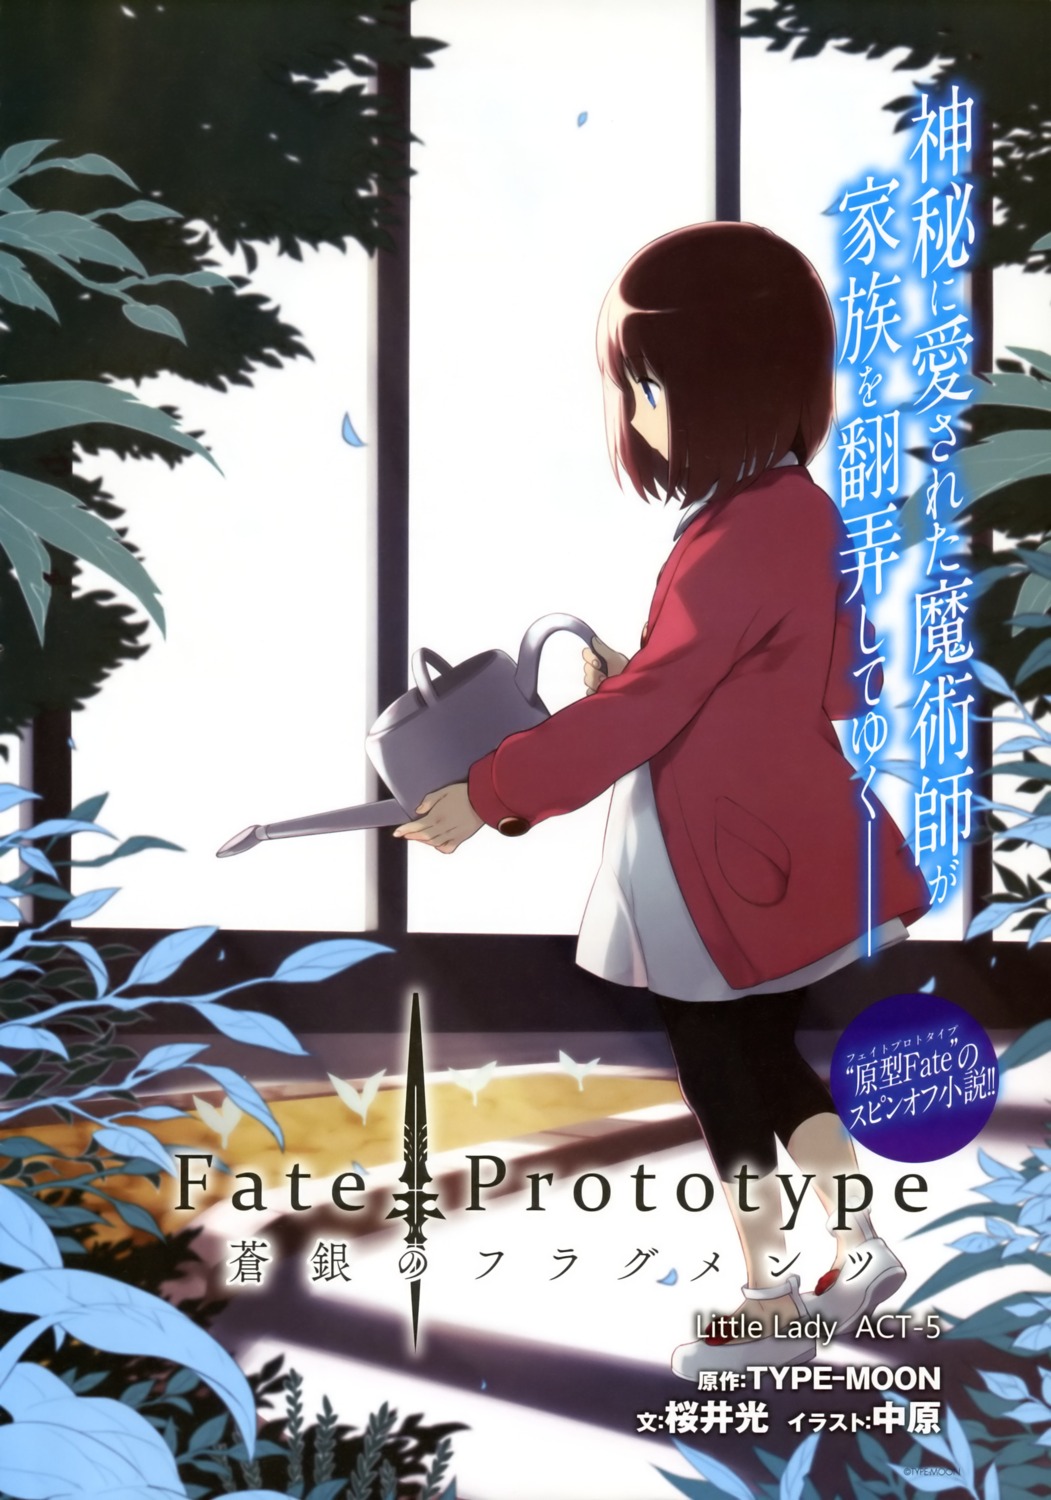 fate/prototype fate/prototype:_fragments_of_blue_and_silver fate/stay_night nakahara sajyou_ayaka type-moon